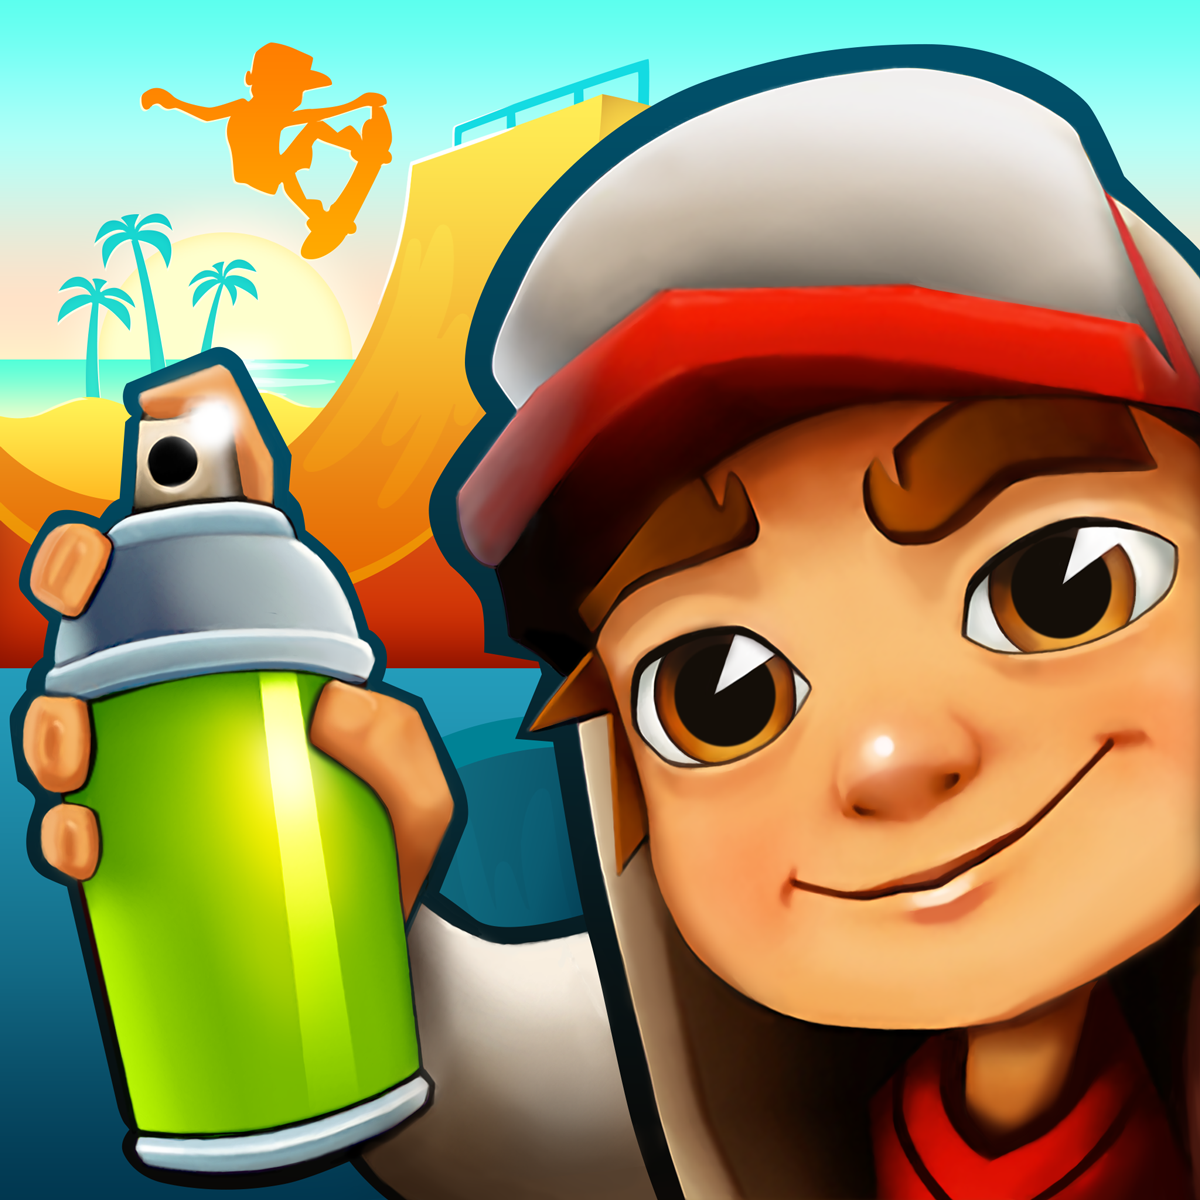 Subway Surfers Icon at Vectorified.com | Collection of Subway Surfers ...